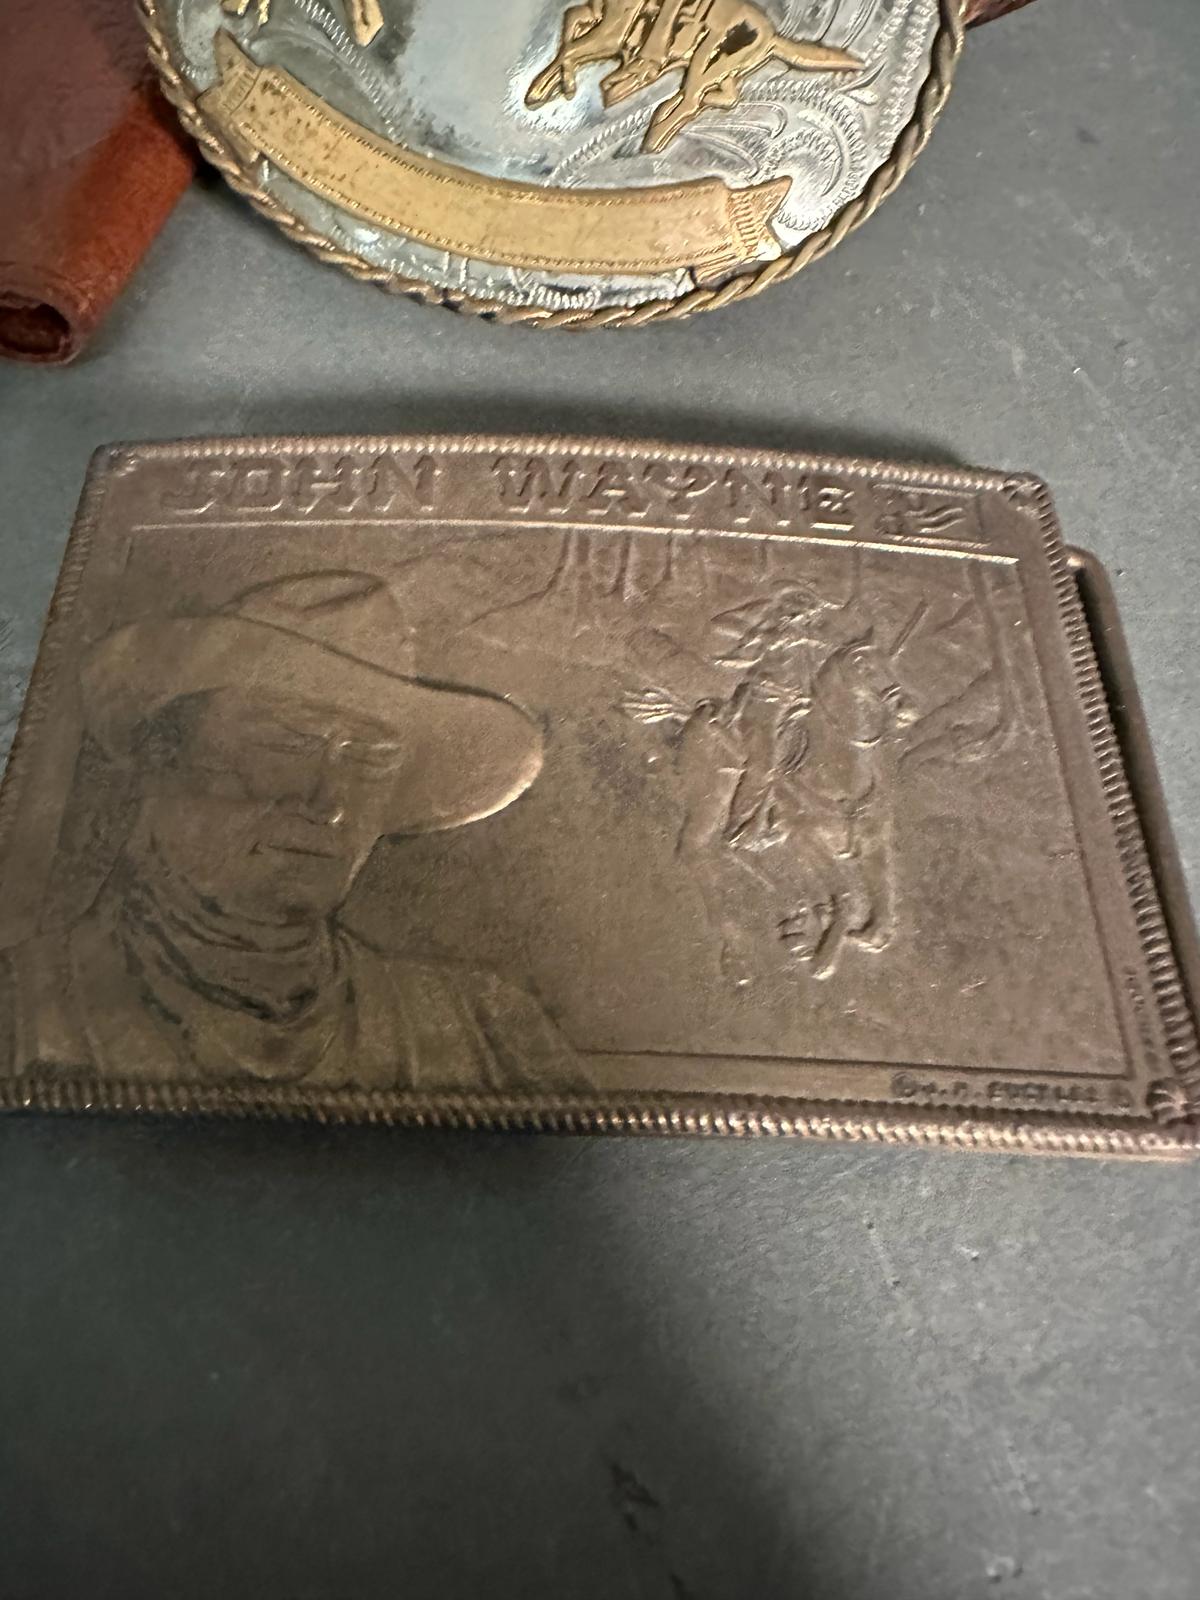 A selection of vintage leather goods and belt buckles to include cowboy belts, wallets and a - Image 3 of 7